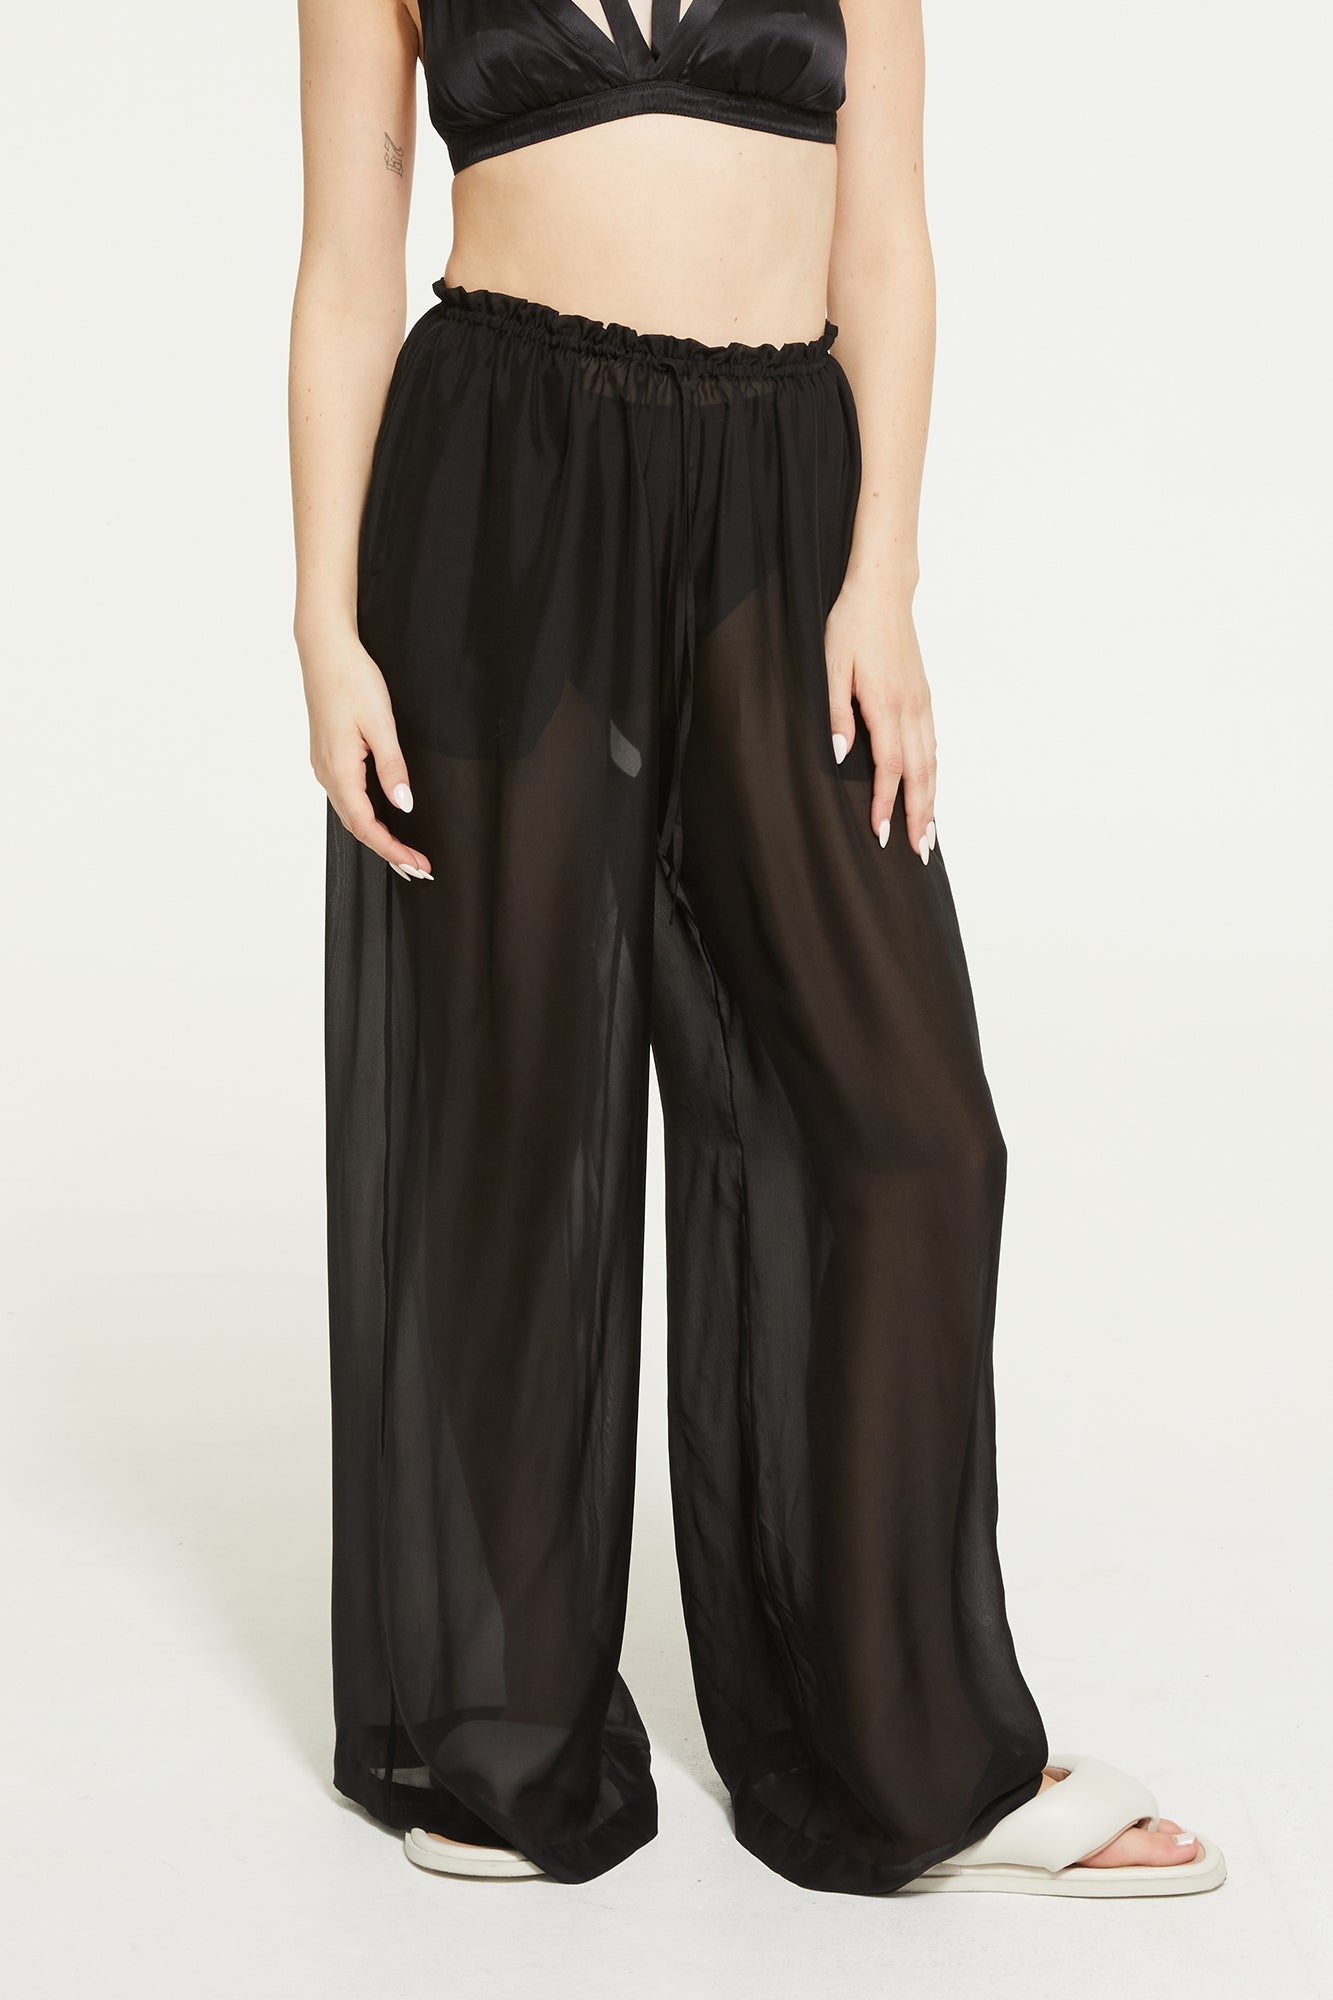 Marli Pant in Black from GINIA